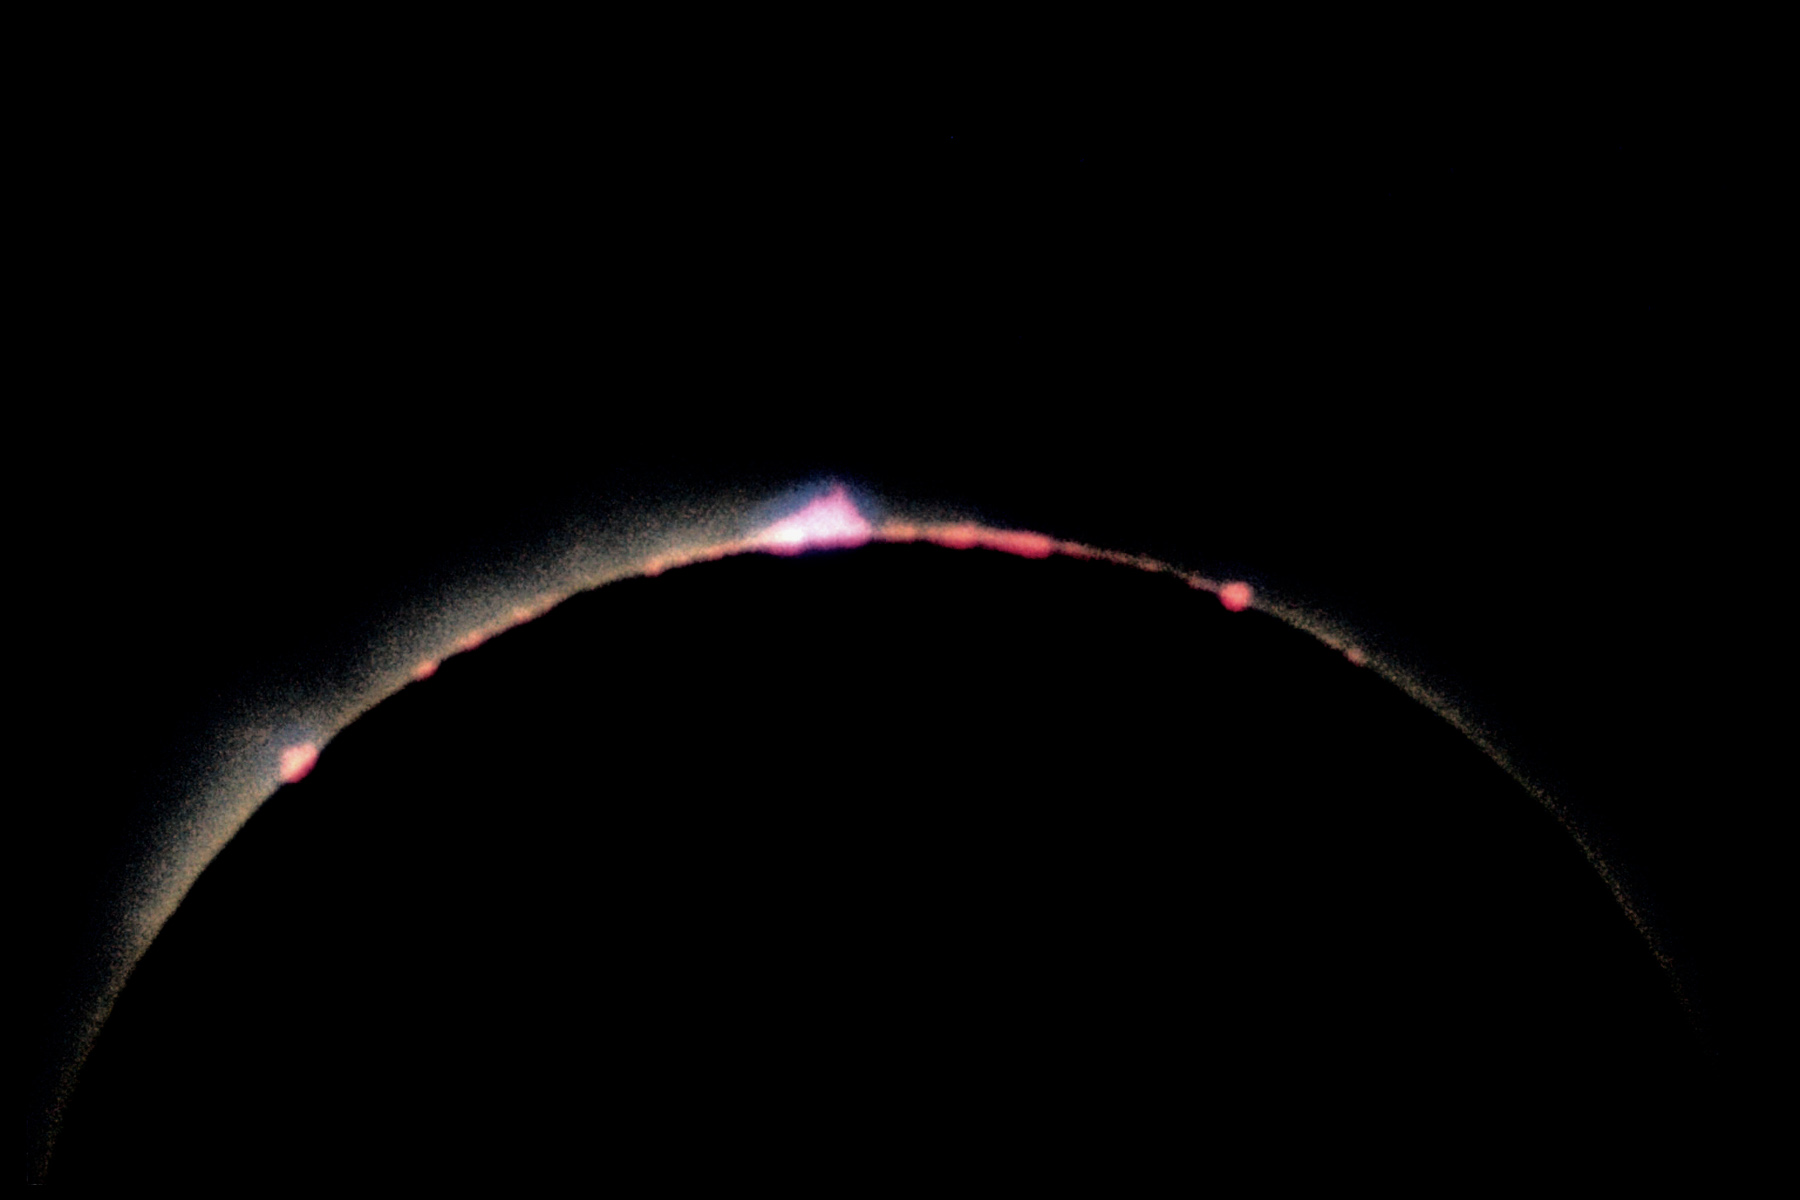 Eclipse 1973 - A74 - Start of Totality